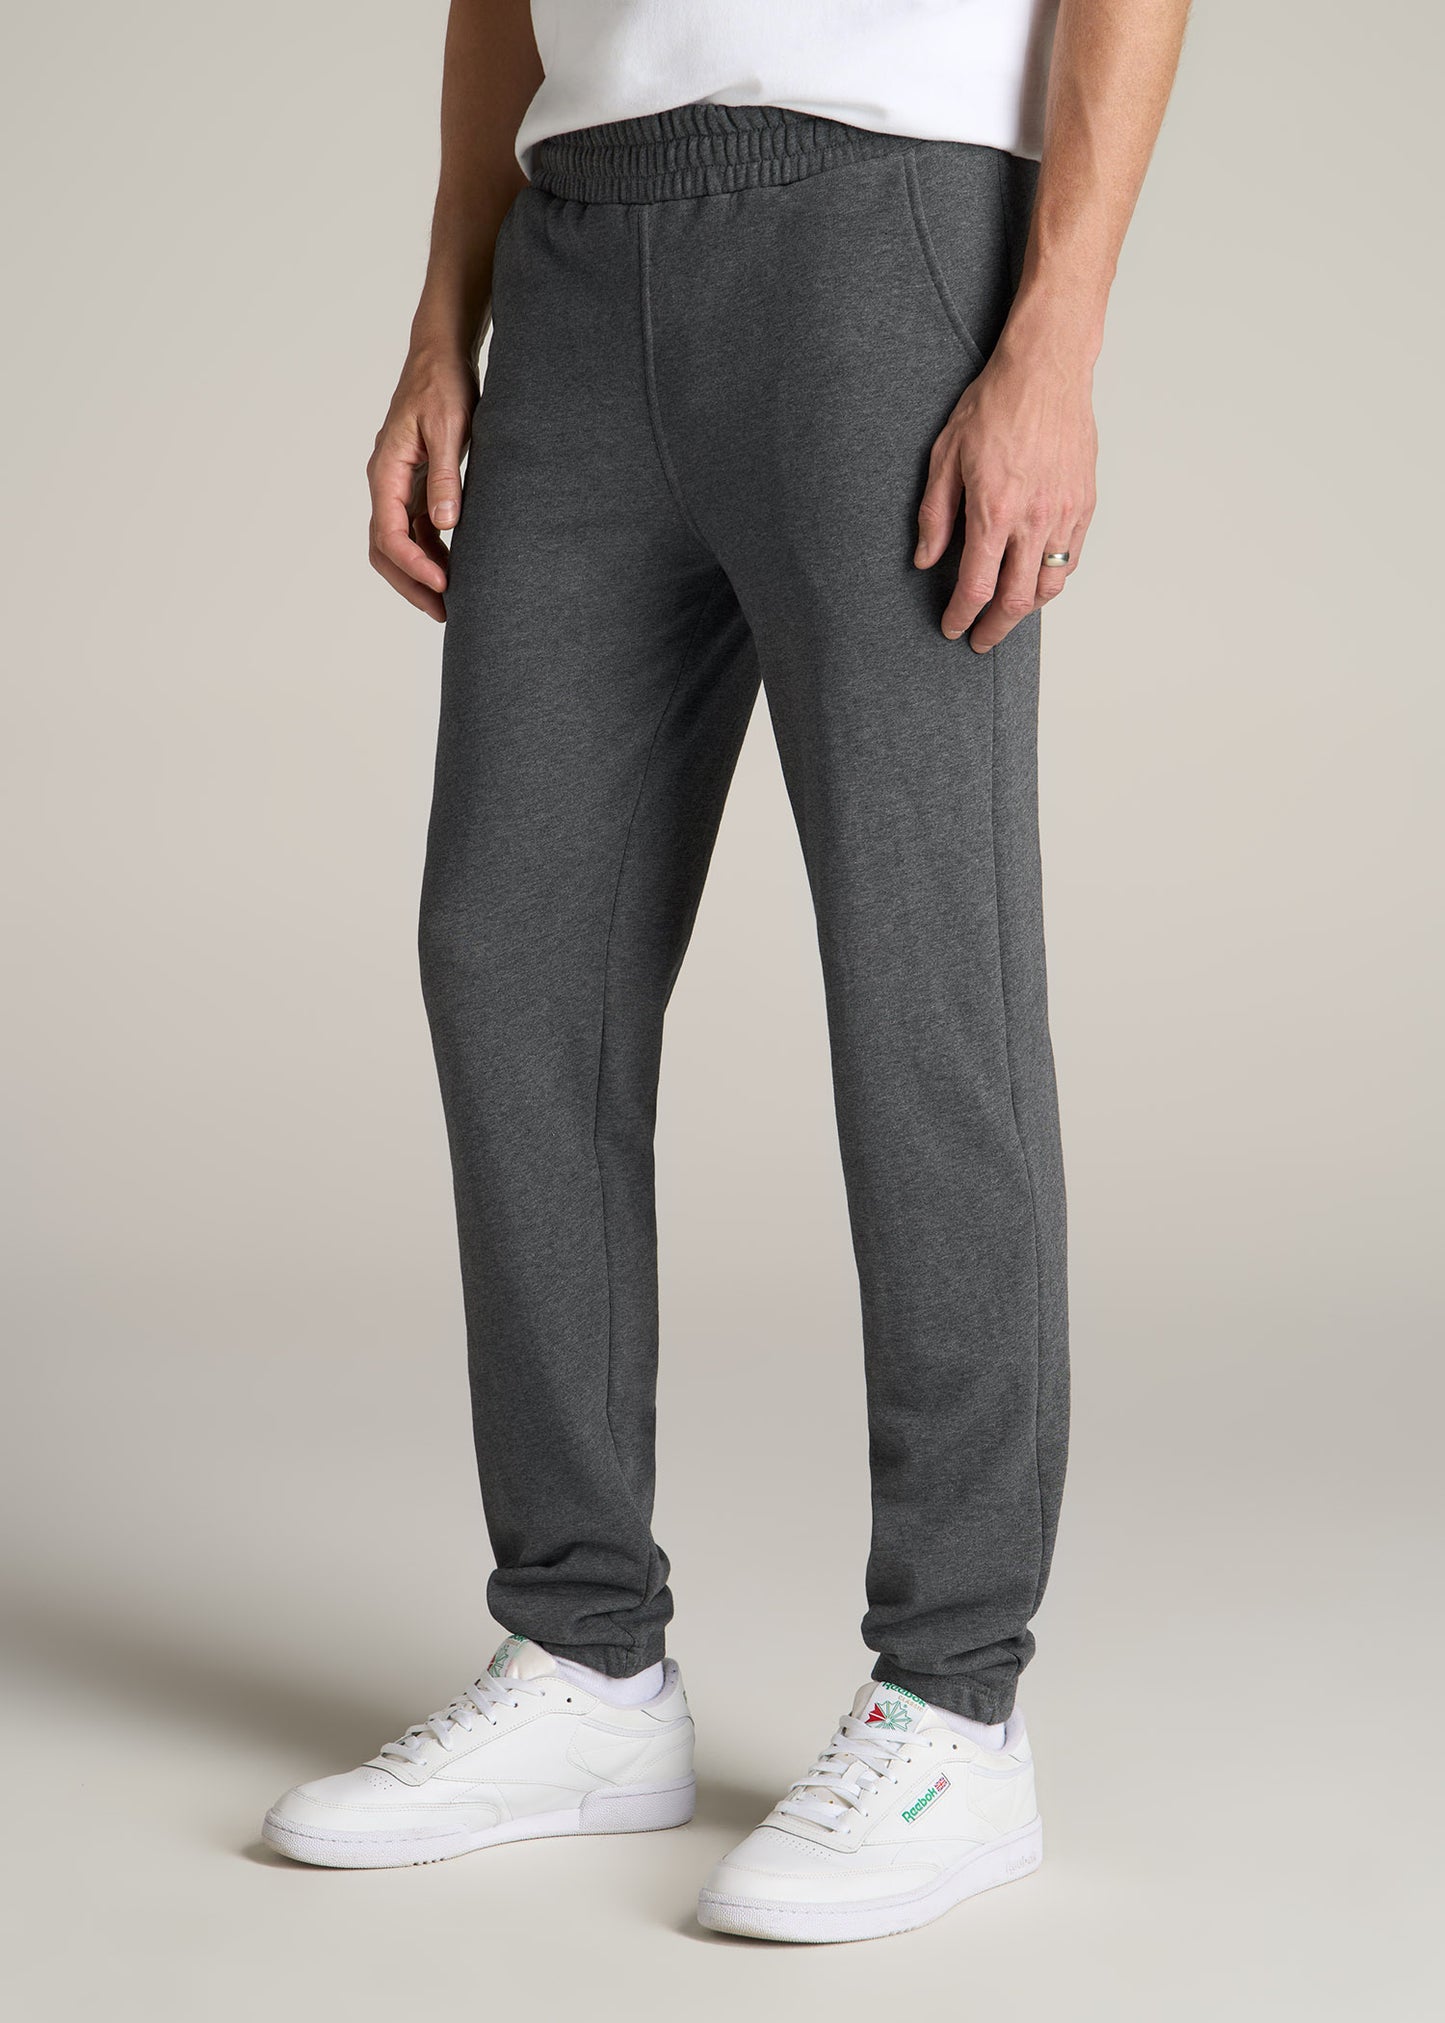 American-Tall-Men-Wearever-French-Terry-Sweatpants-Men-Charcoal-Mix-side